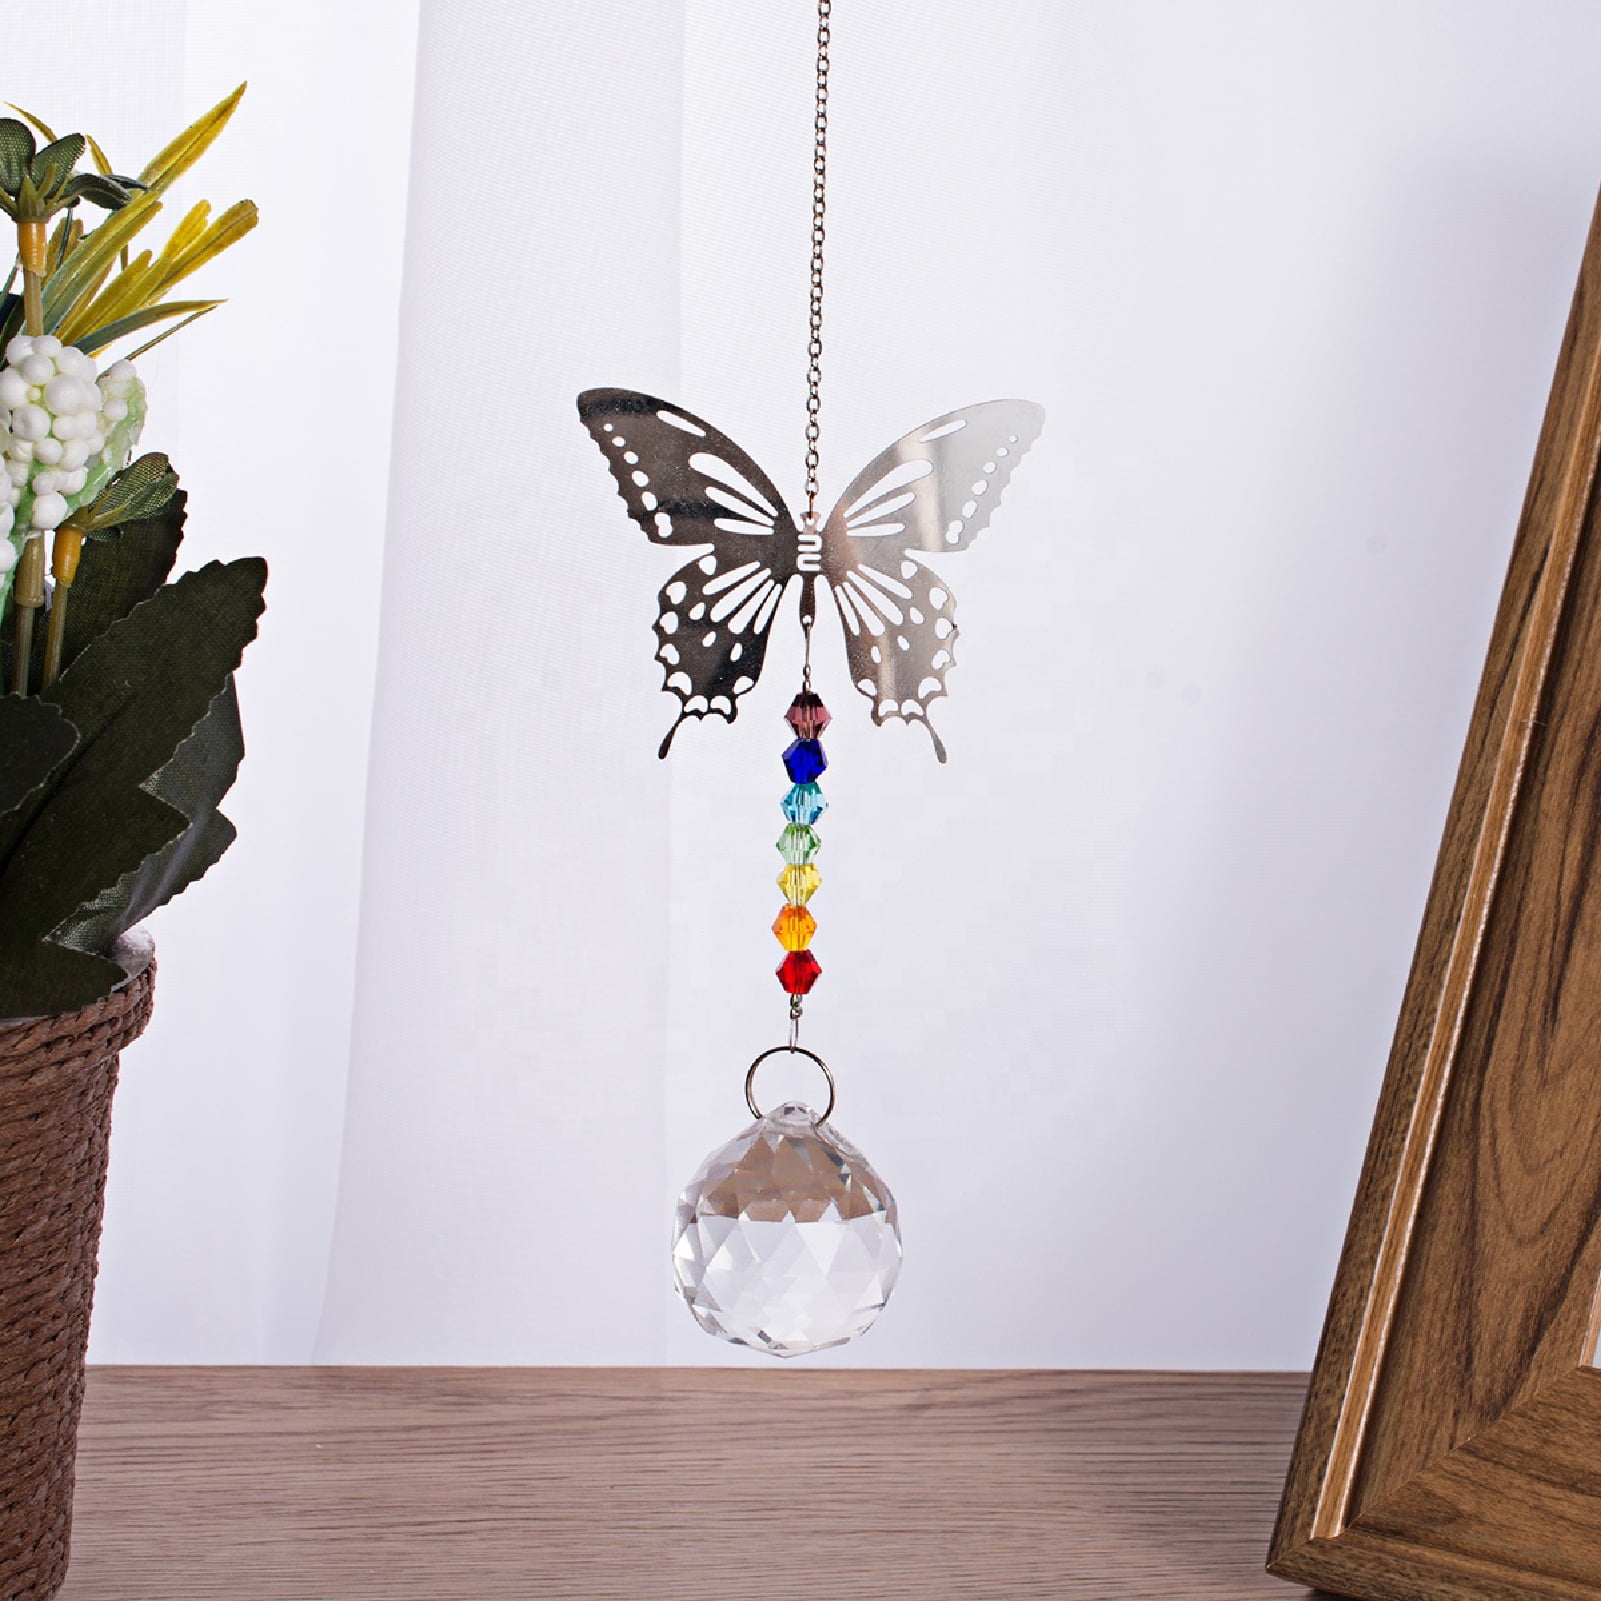 Details about  / Crystal Butterfly Prisms Ball Home Party Hanging Ornament Car Pendant Decor